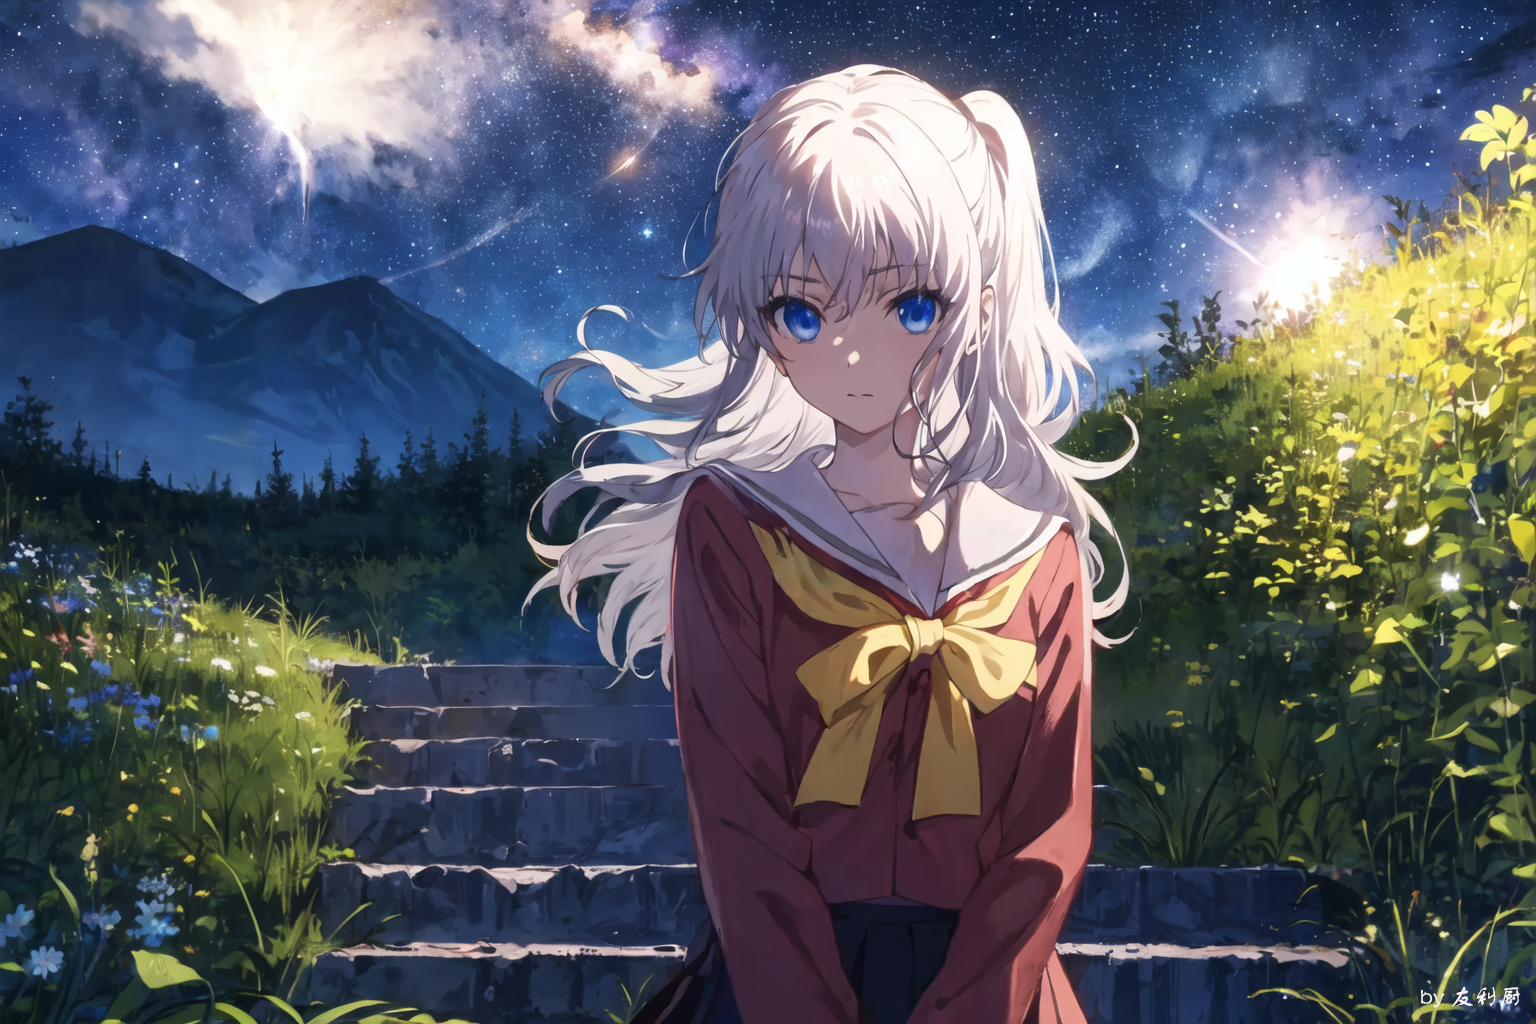 Charlotte Anime Review: Does This Series with Superpowers Emerge  Victorious? – railgunfan75's Geek blog